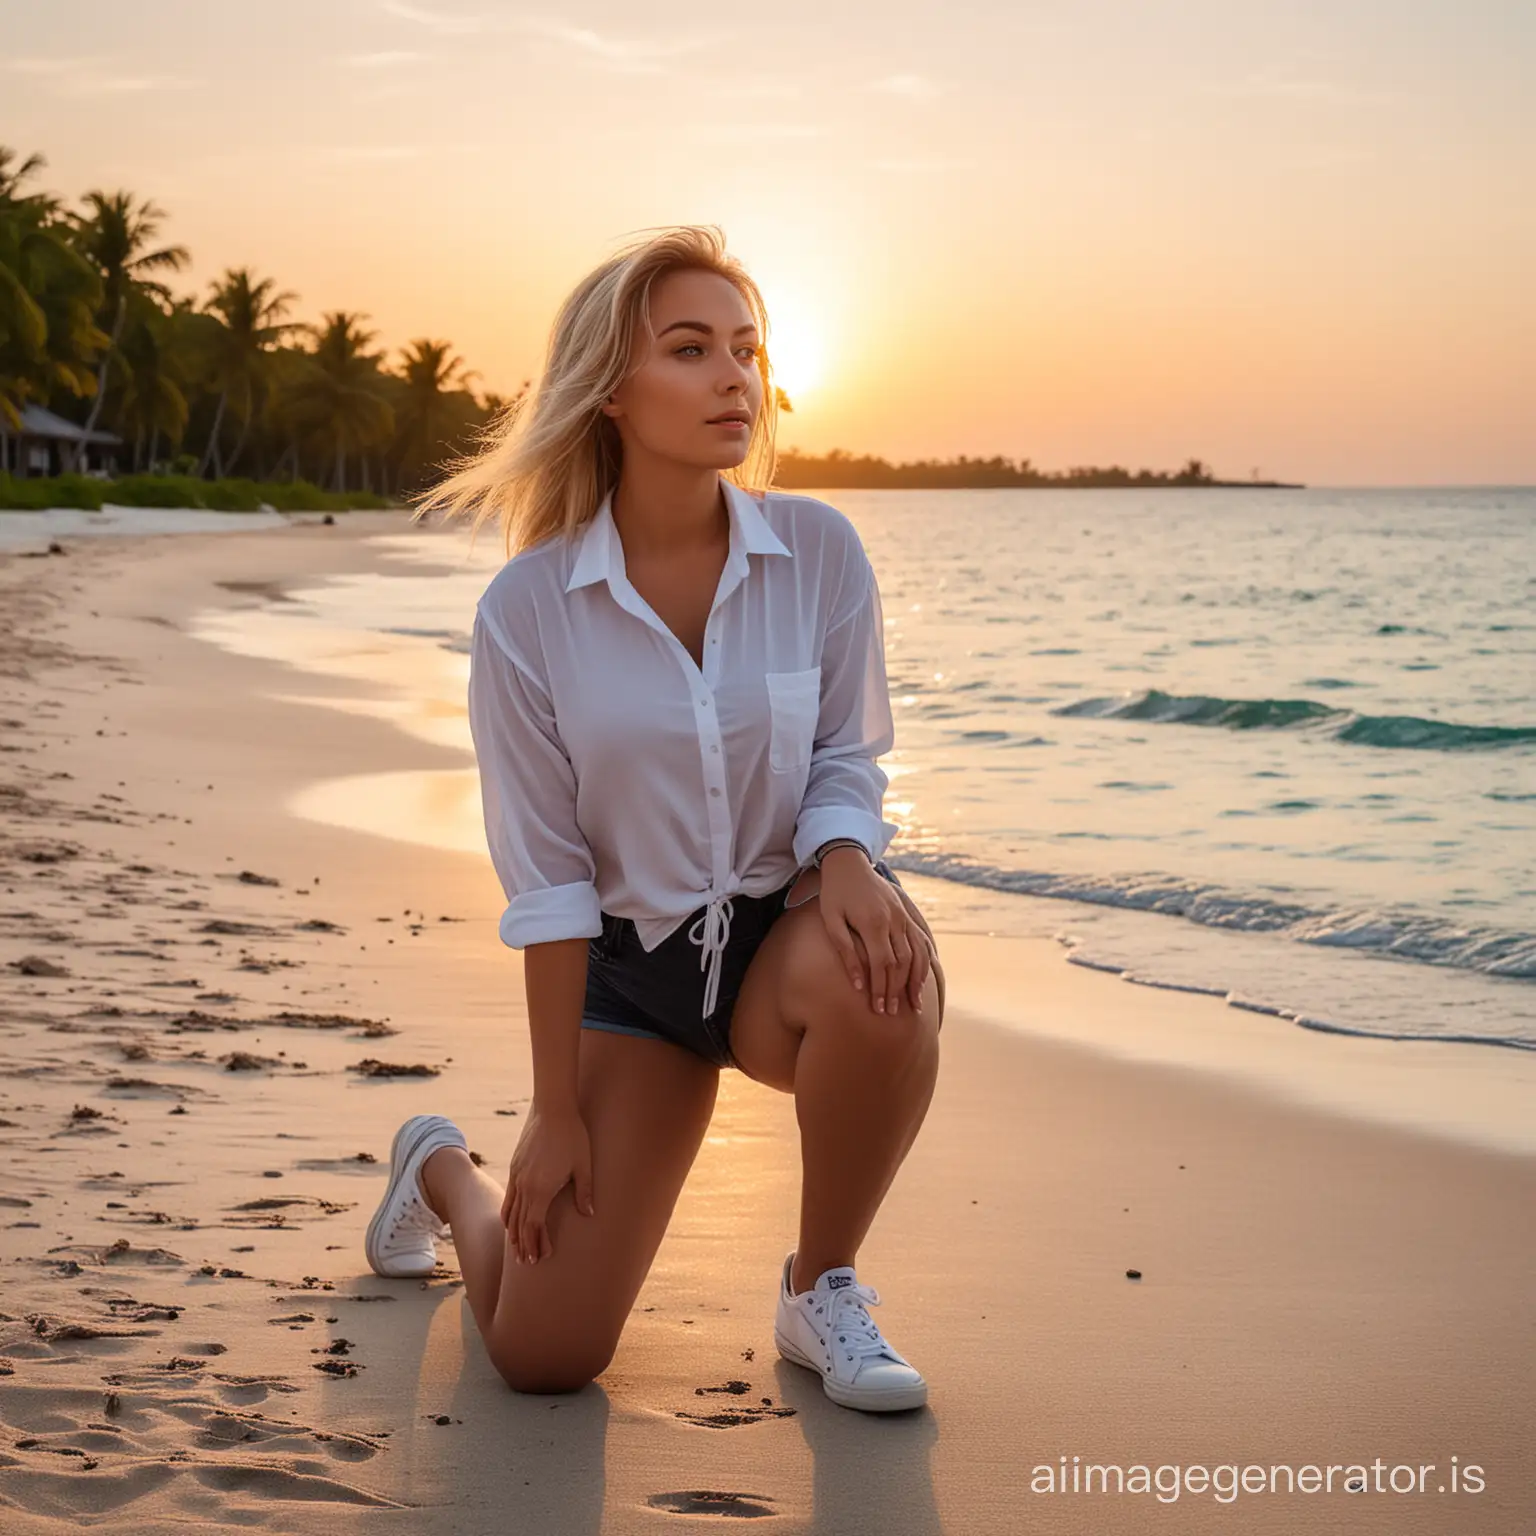 Blonde-Curvy-Girl-in-Doggy-Pose-at-Sunset-Maldives-Beach